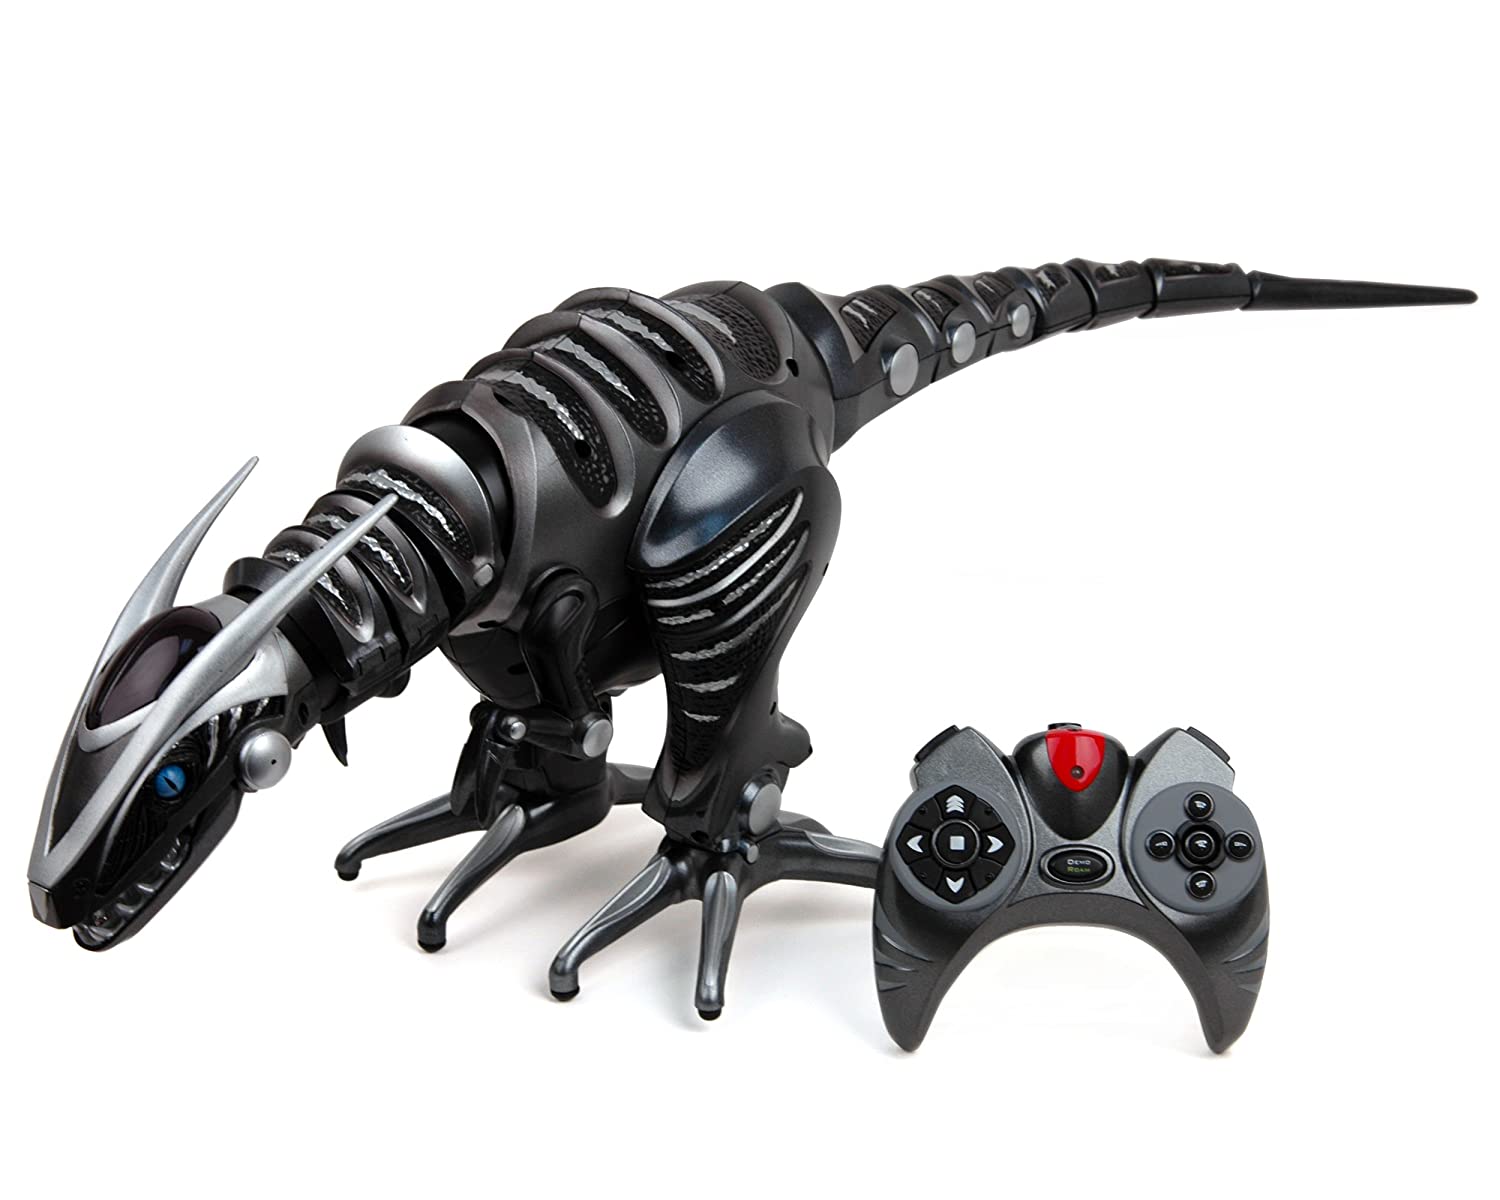 Top 7 Best Robot Dinosaur Toys Reviews in 2023 1